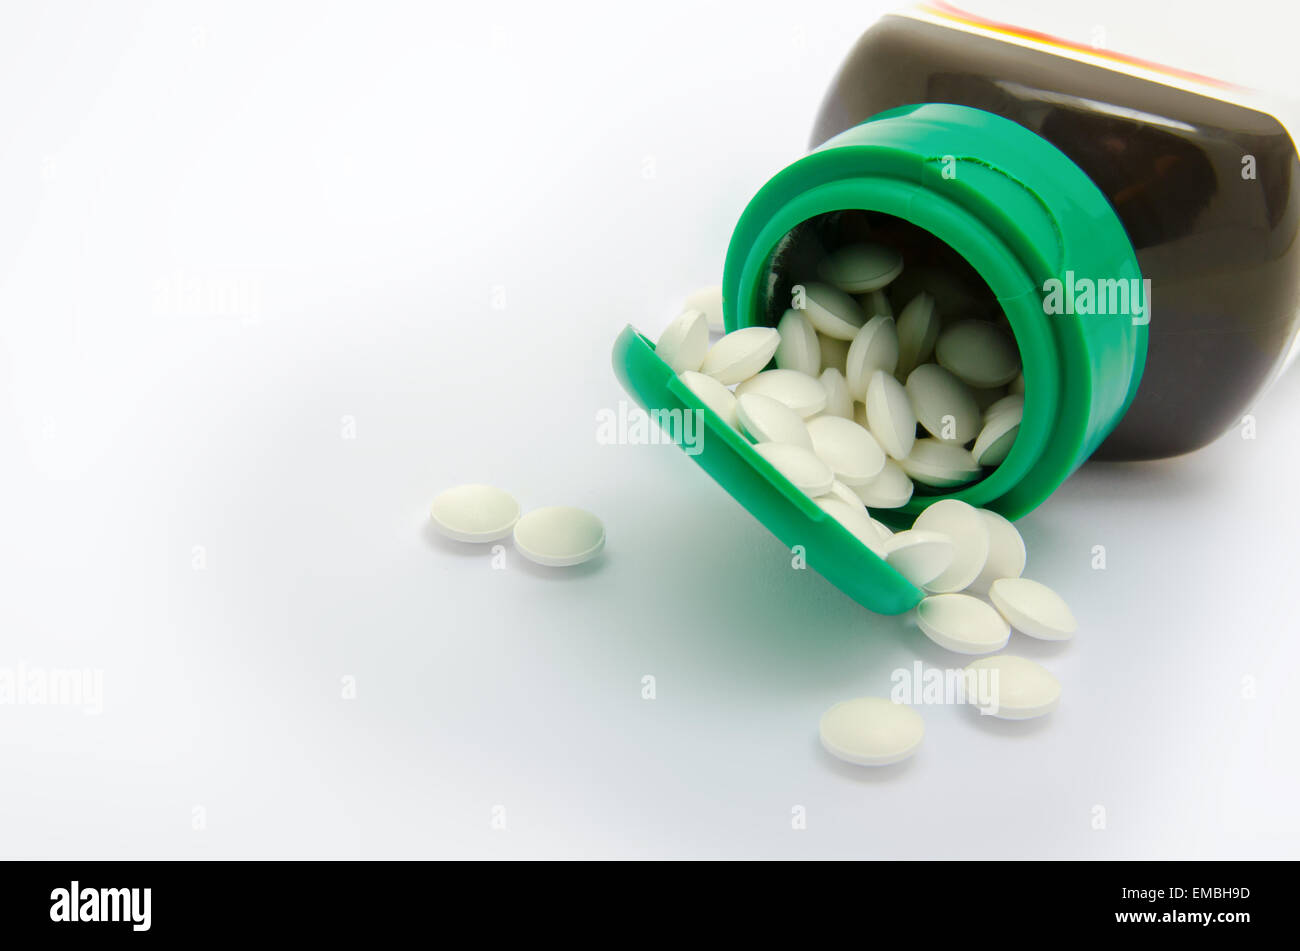 Small white pills spilling out of a green bottle Stock Photo